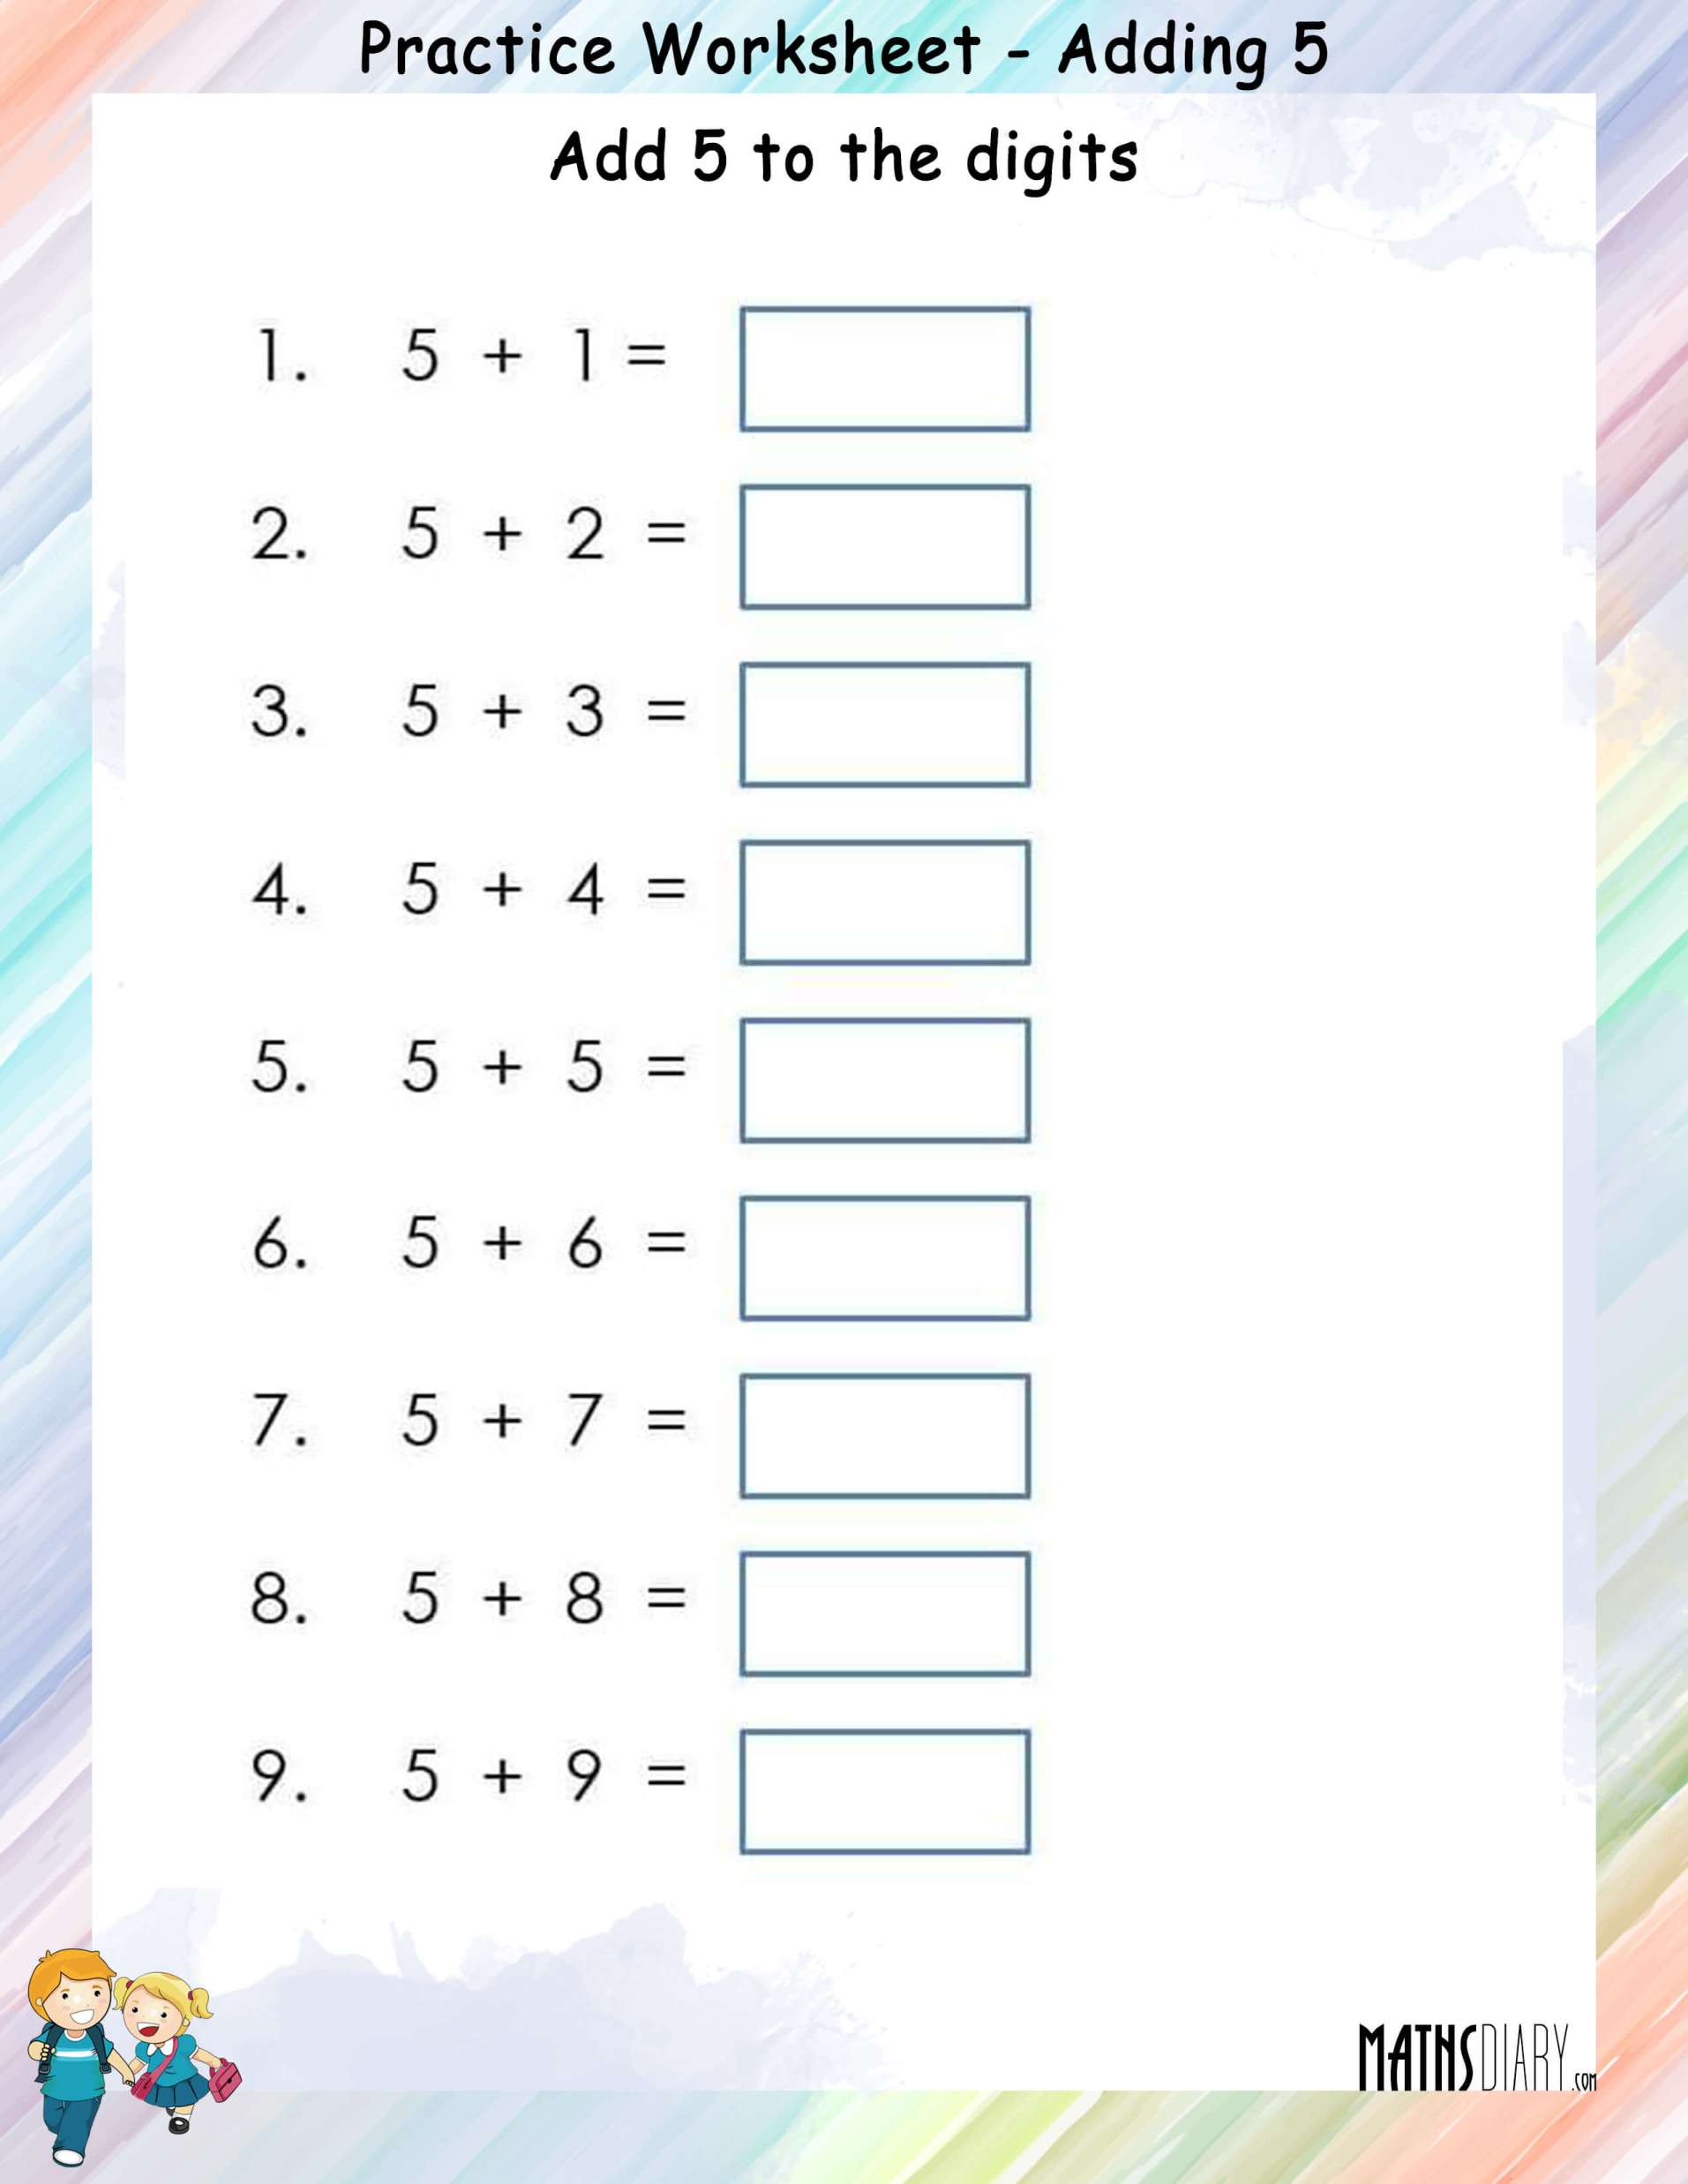 grade-2-place-value-and-rounding-worksheets-free-printable-k5-learning